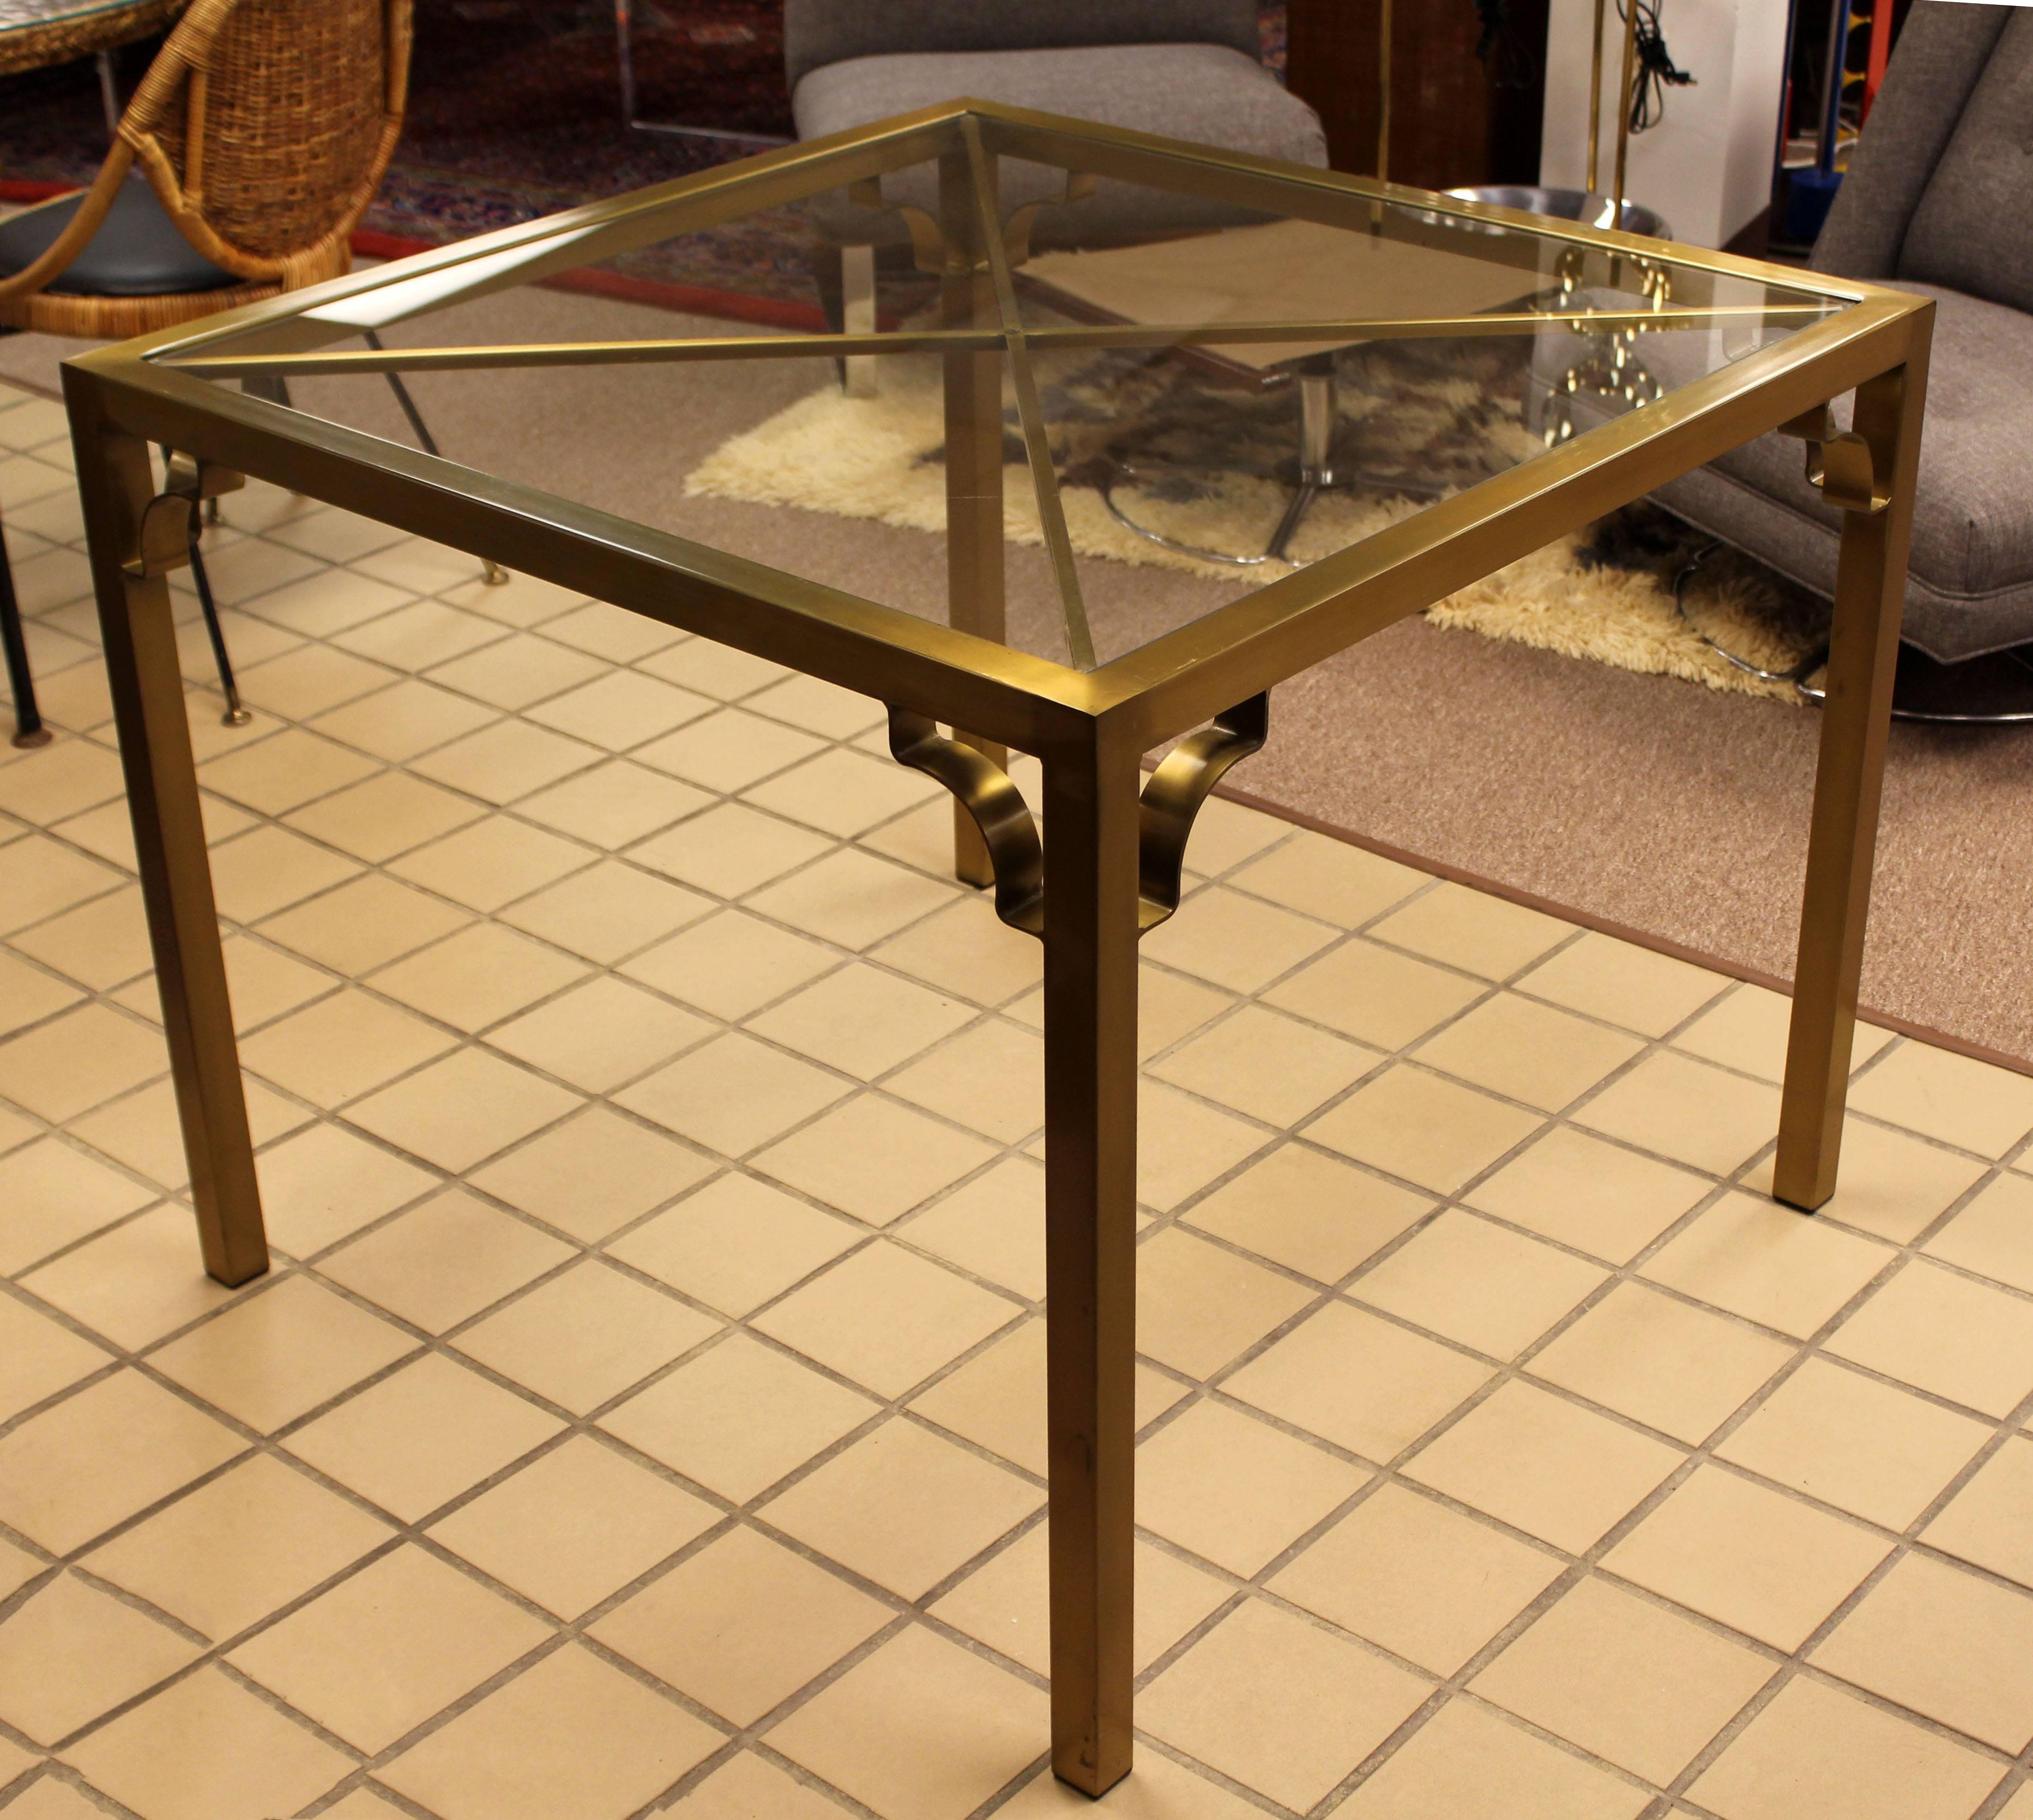 For your consideration is a sweet, brass and glass, dinette or game table attributed to Mastercraft, circa the 1970s. In excellent condition, with some minor surface scratches. The dimensions are 36